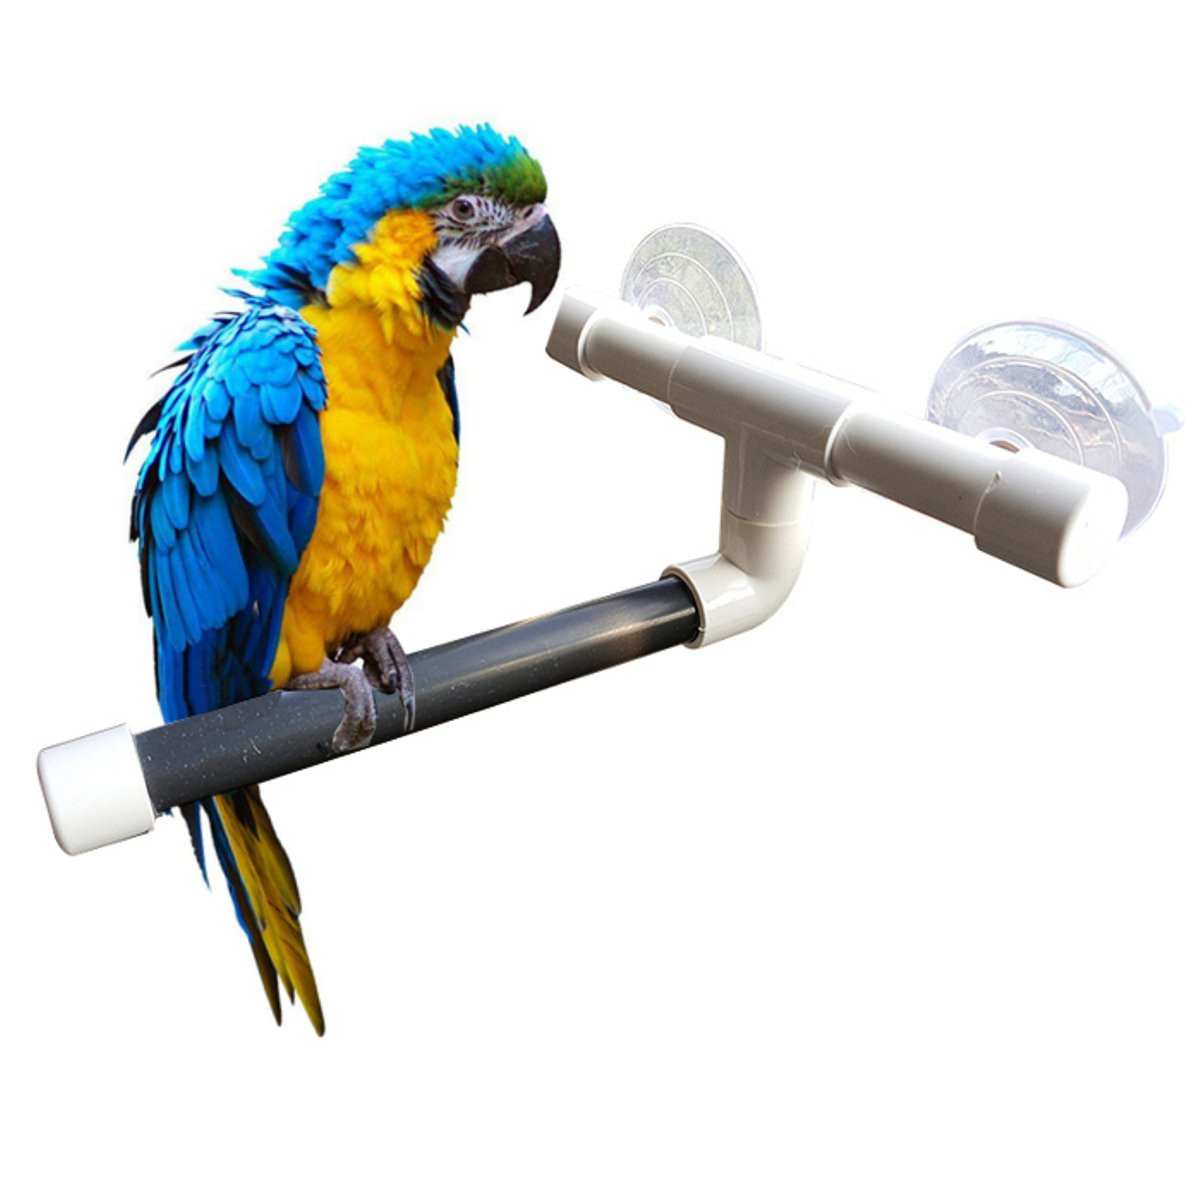 Pet-Bird-Perch-Parrot-Shower-Stand-Wall-Suction-Cup-Toys-Paw-Grinding-Shower-Shelf-Decorations-1460344